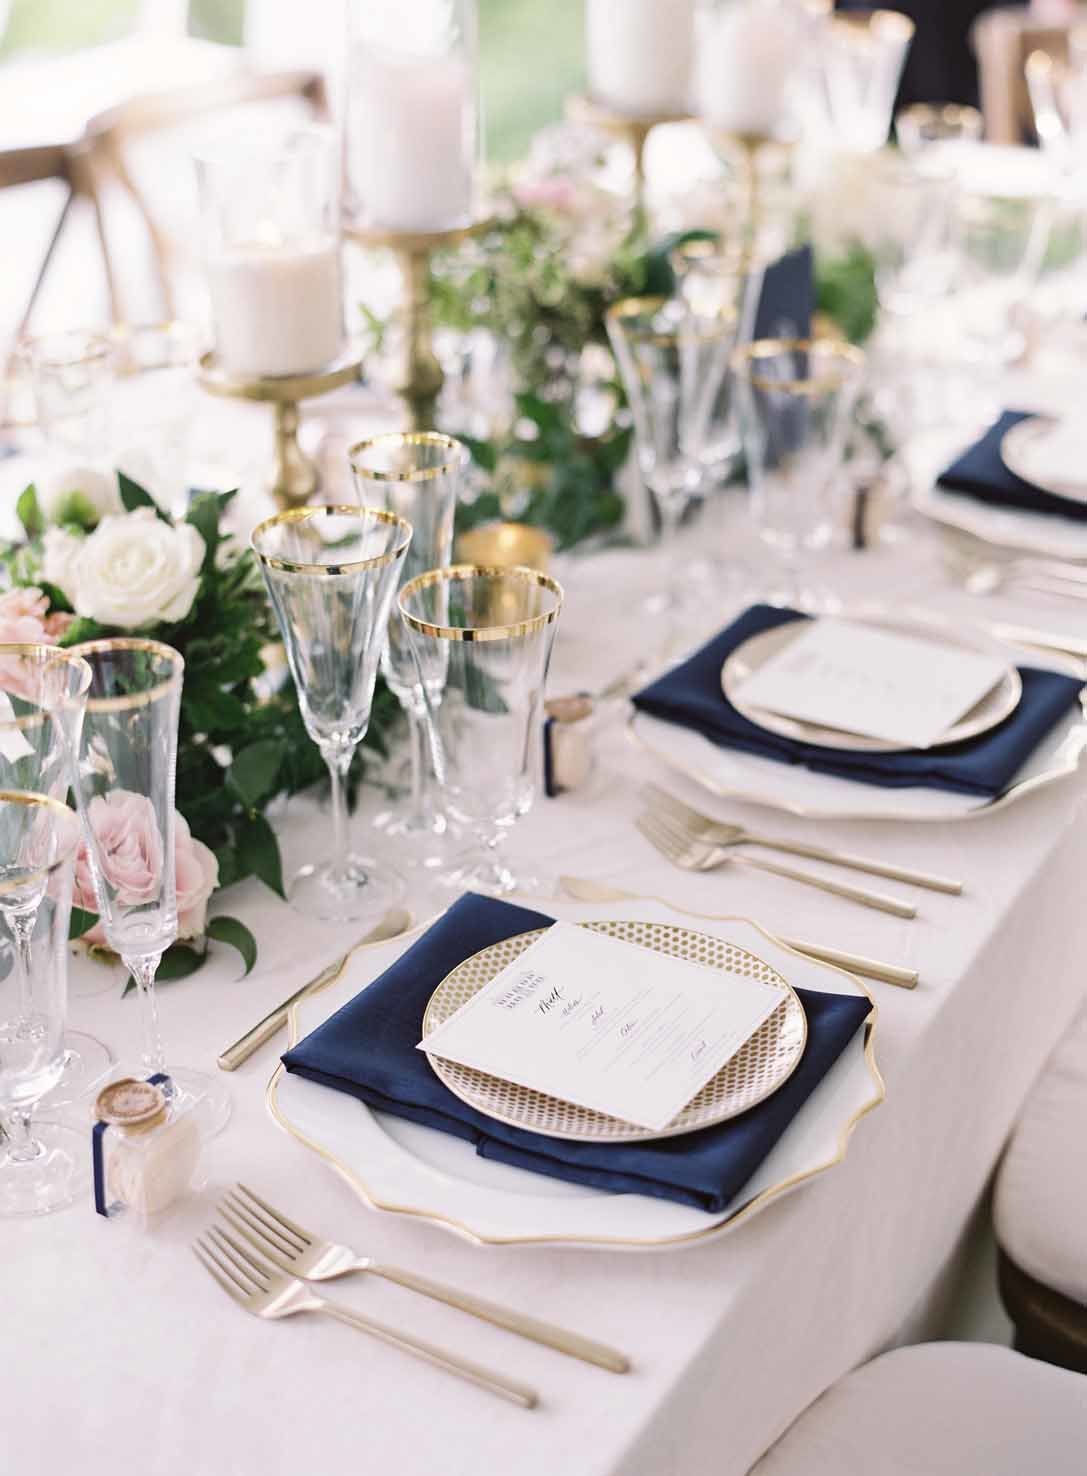 long reception table lined with flowers and candles, gold flatware, navy blue napkins, and gold rimmed plates